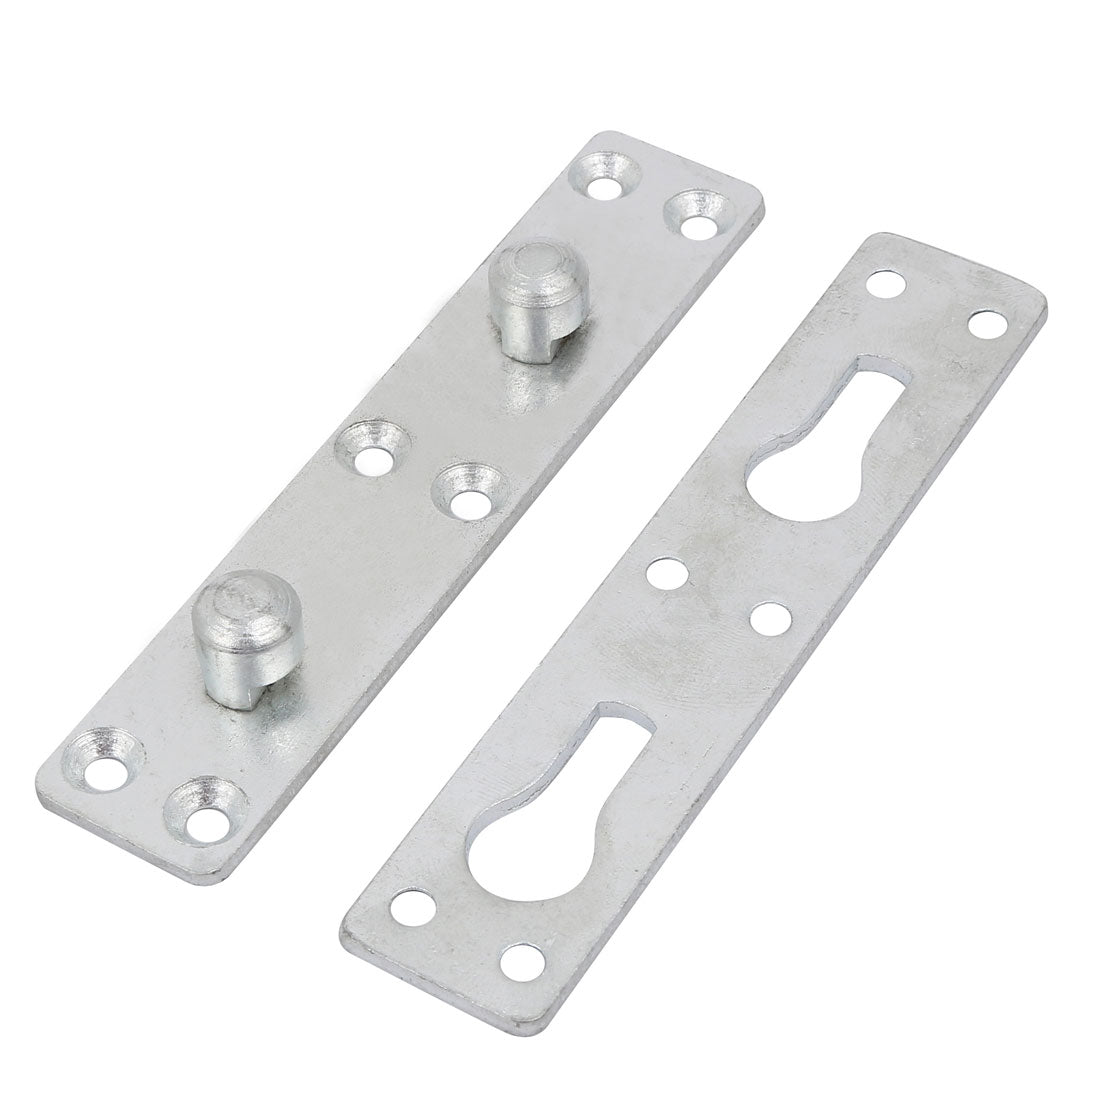 uxcell Uxcell 5-inch Length No-Mortise Bed Hinge Rail Bracket Connecting Fittings 2 Sets